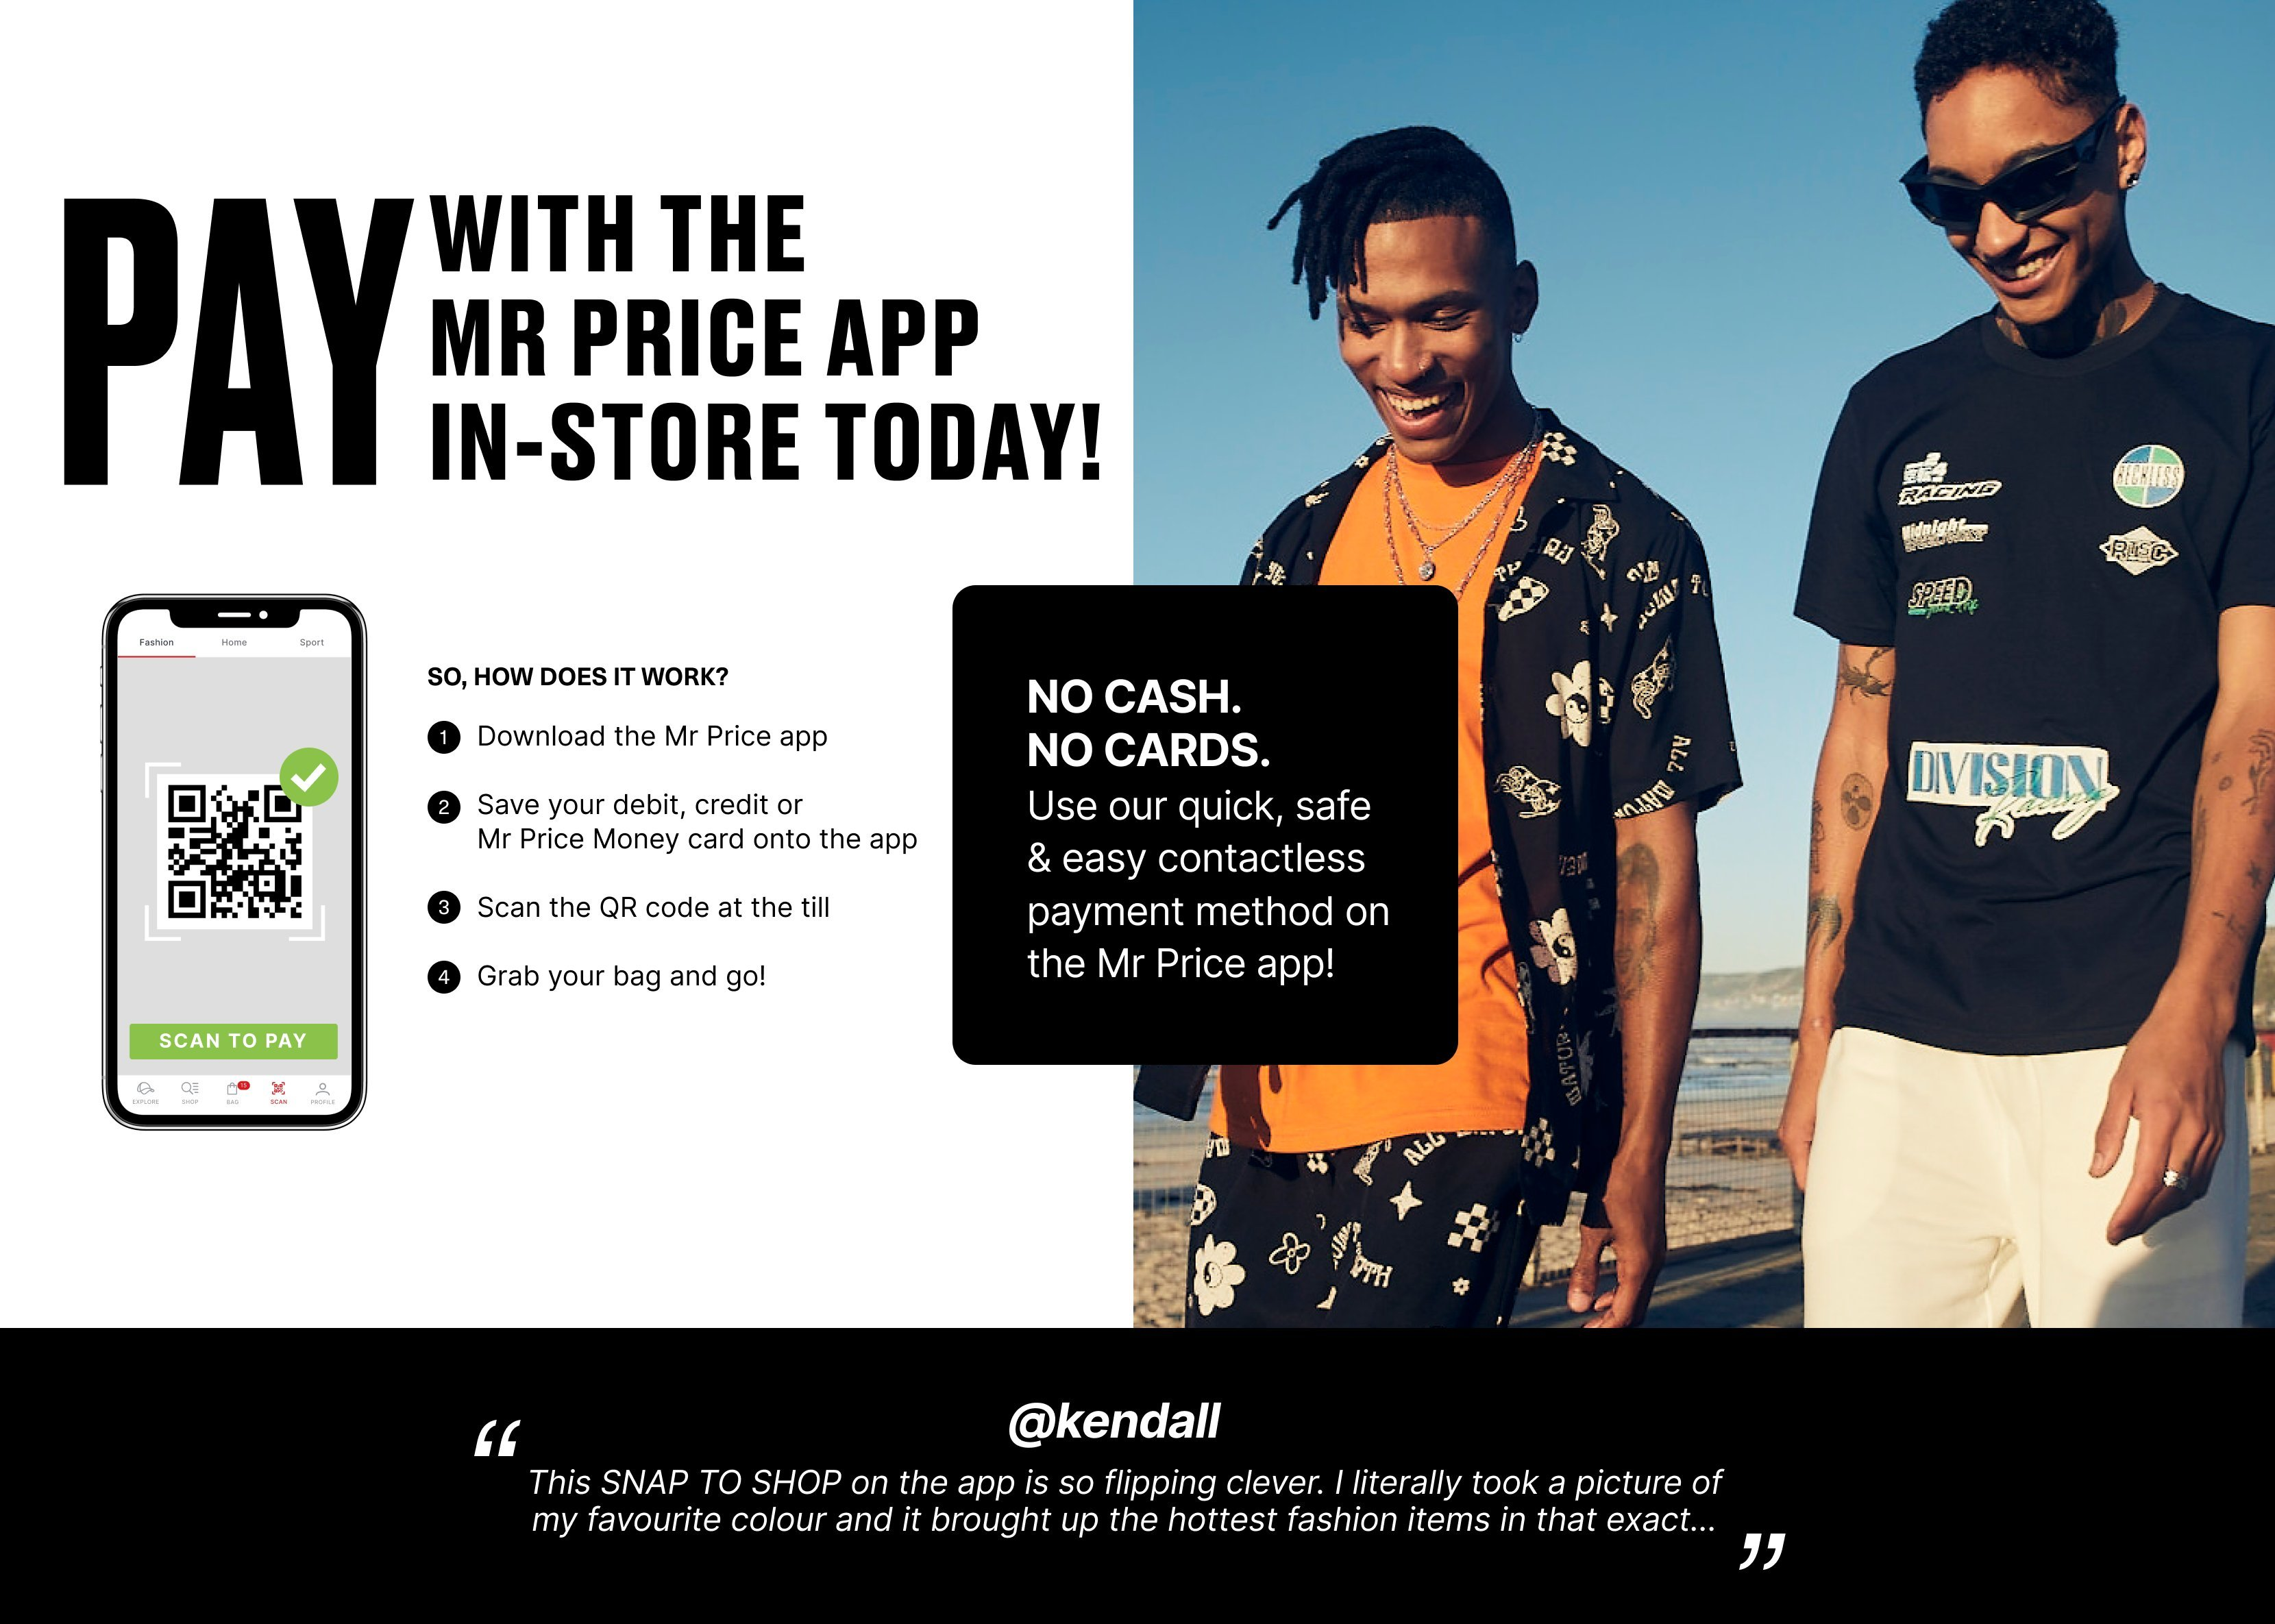 NO CASH. NO CARDS. Use our quick, safe & easy contactless payment method on the Mr Price app!